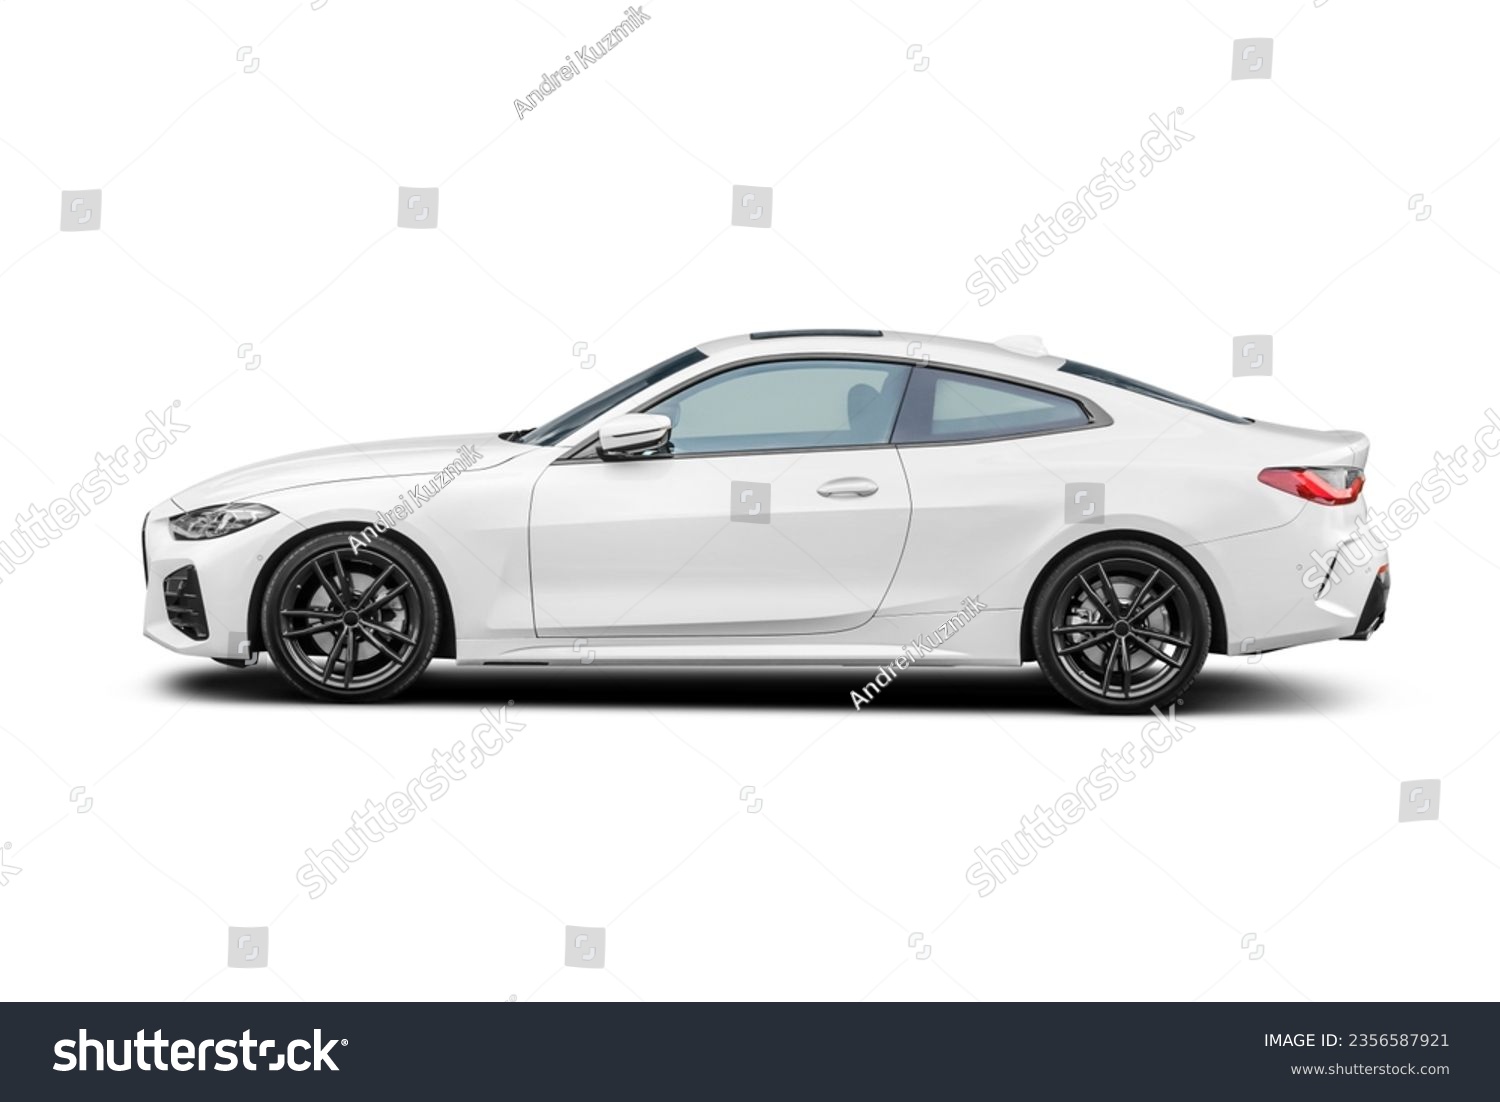 Roadster sport car side view isolated on white background with clipping path. #2356587921